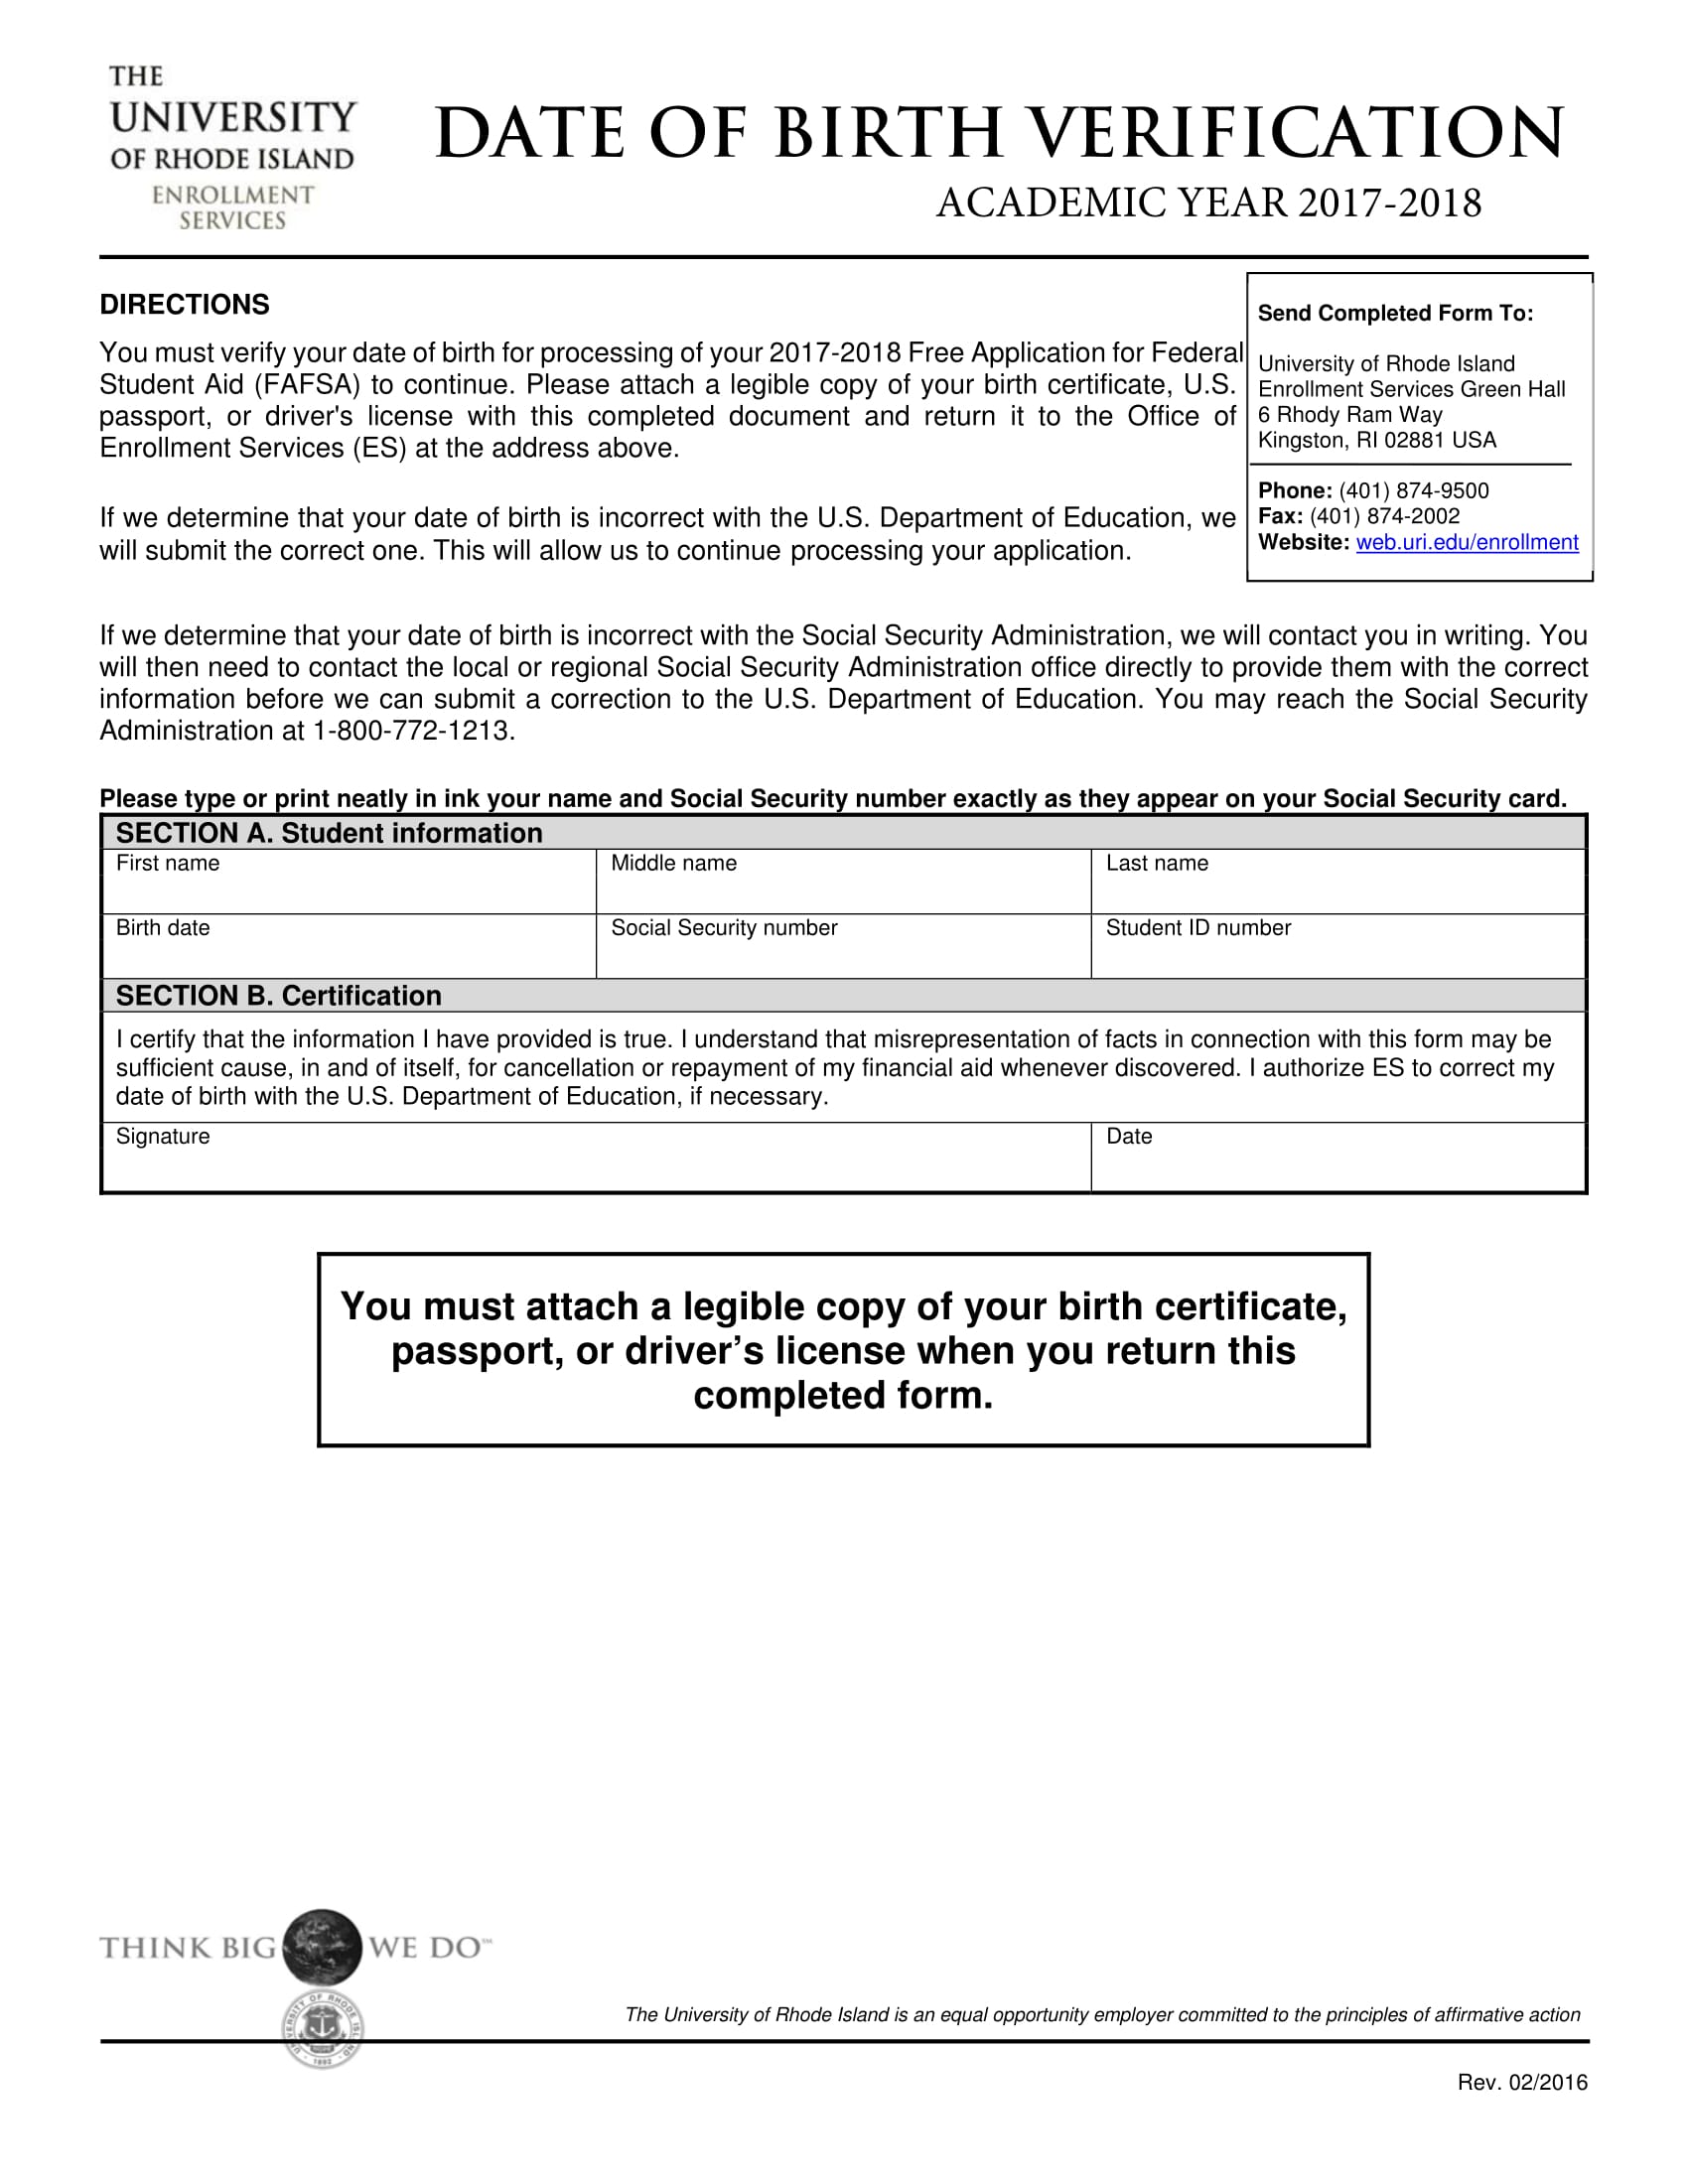 student date of birth verification form 1